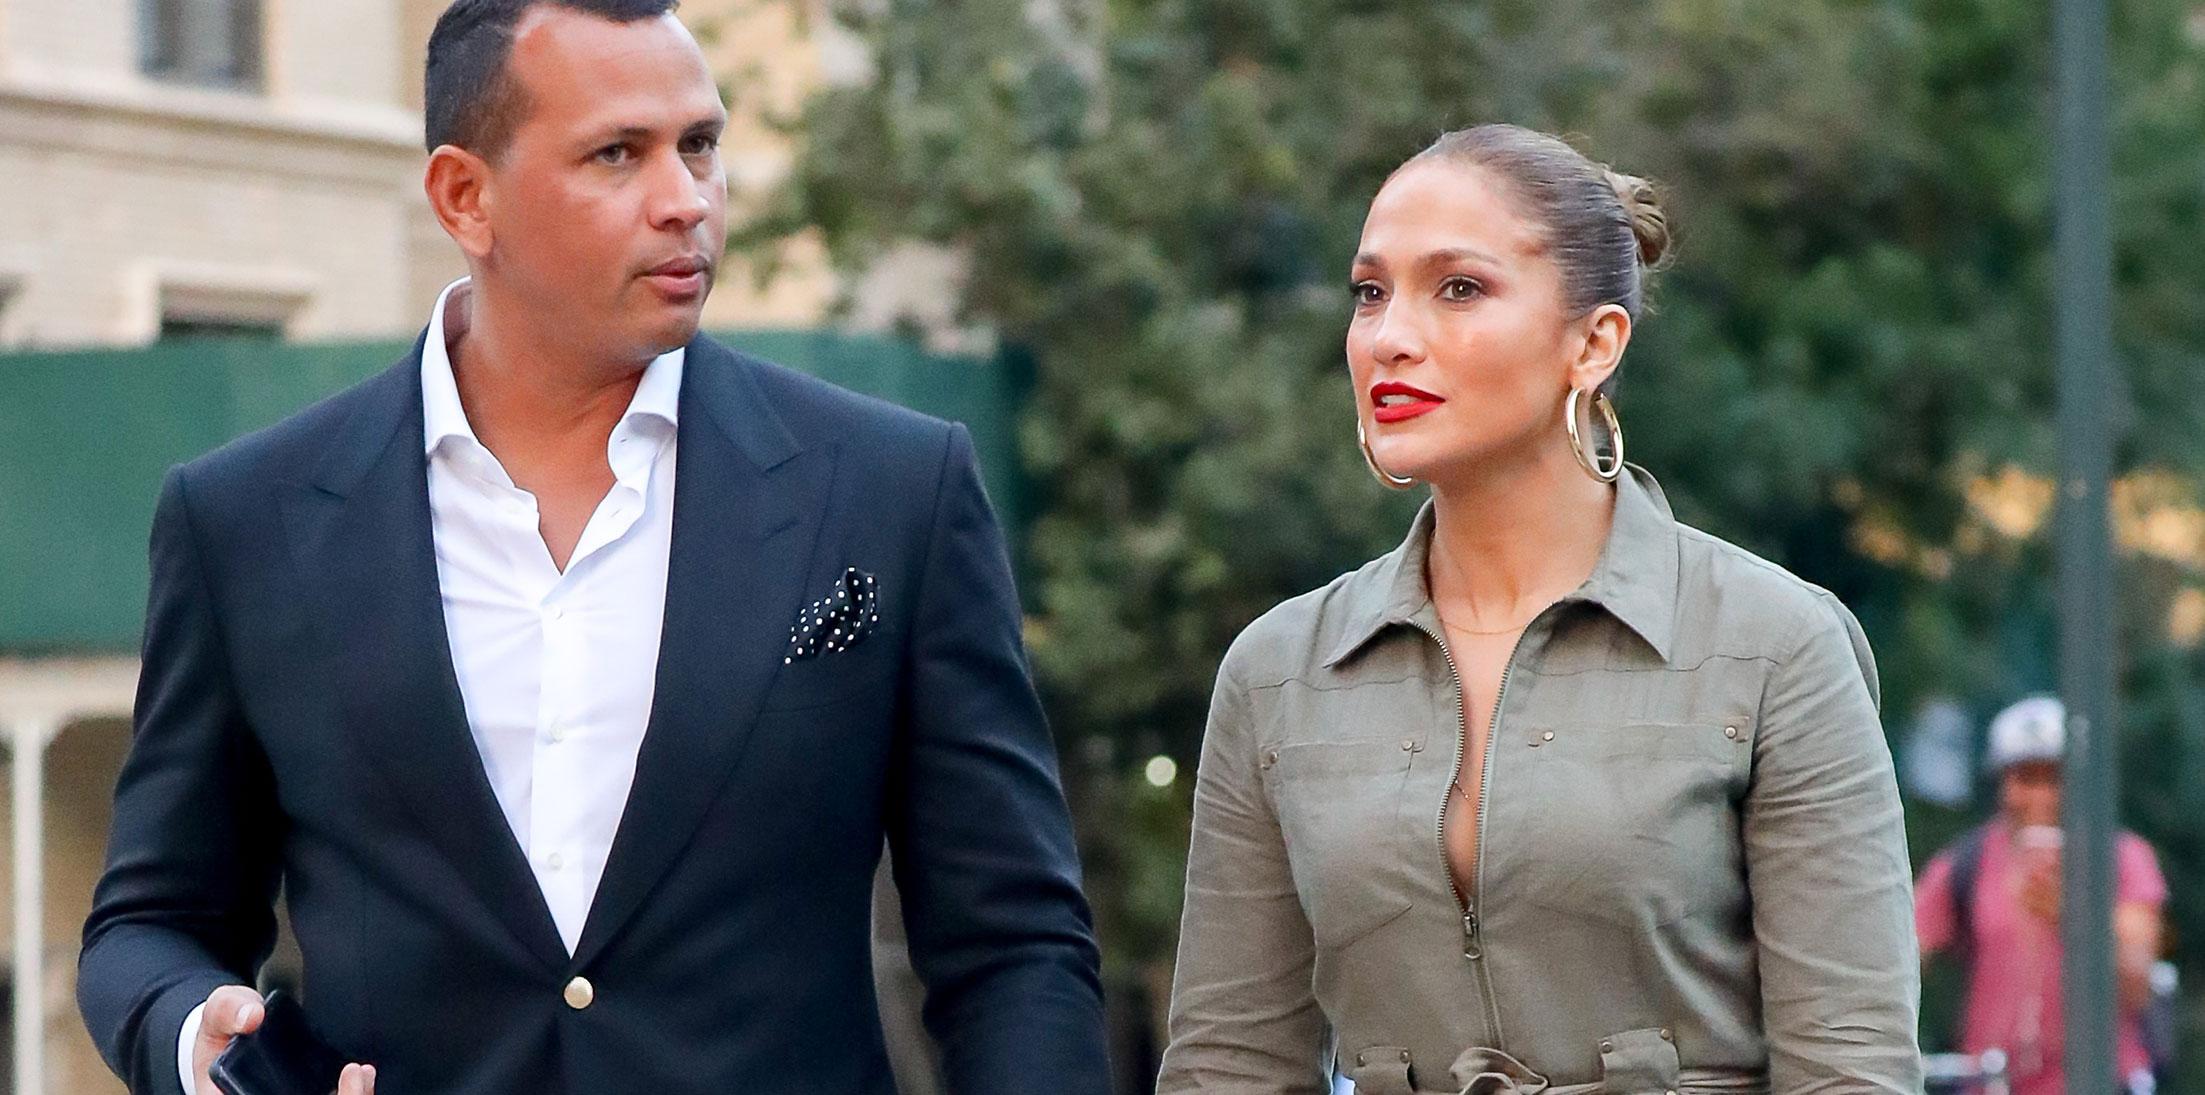 Alex rodriguez can’t stand hunky male attention jennifer lopez receives wide